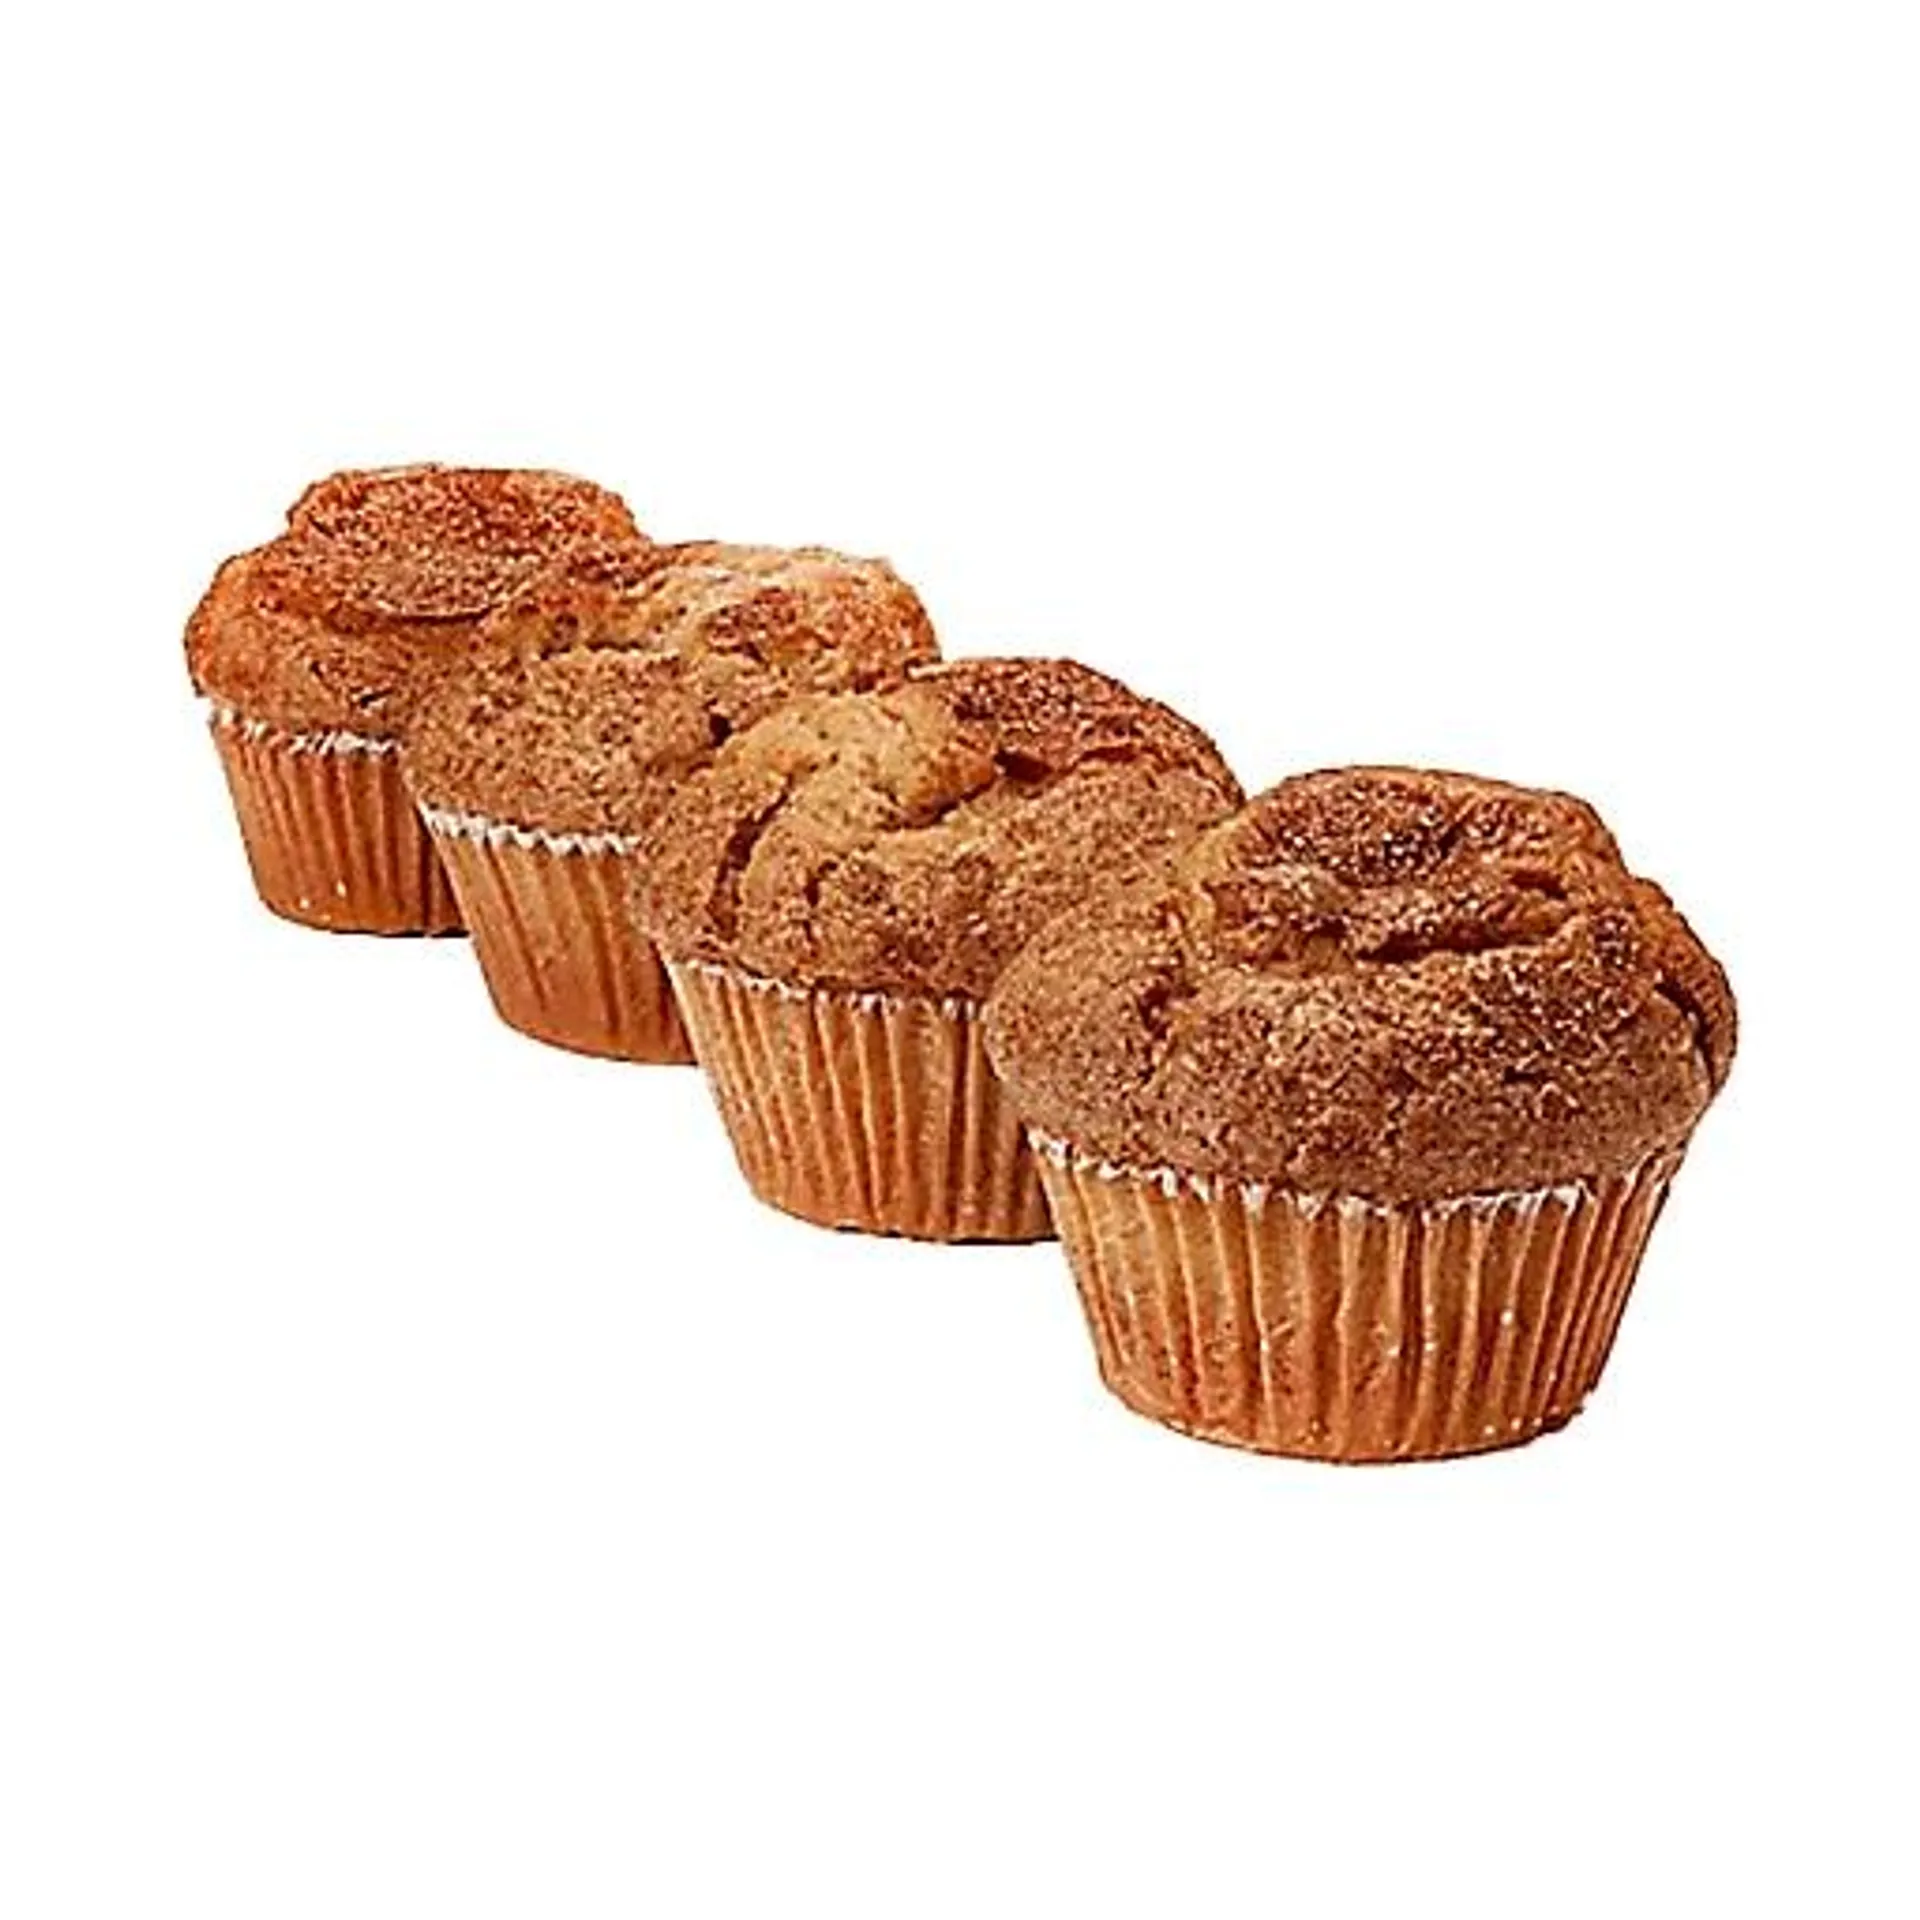 Store Baked - Butter Rum Muffins - 2 Pack